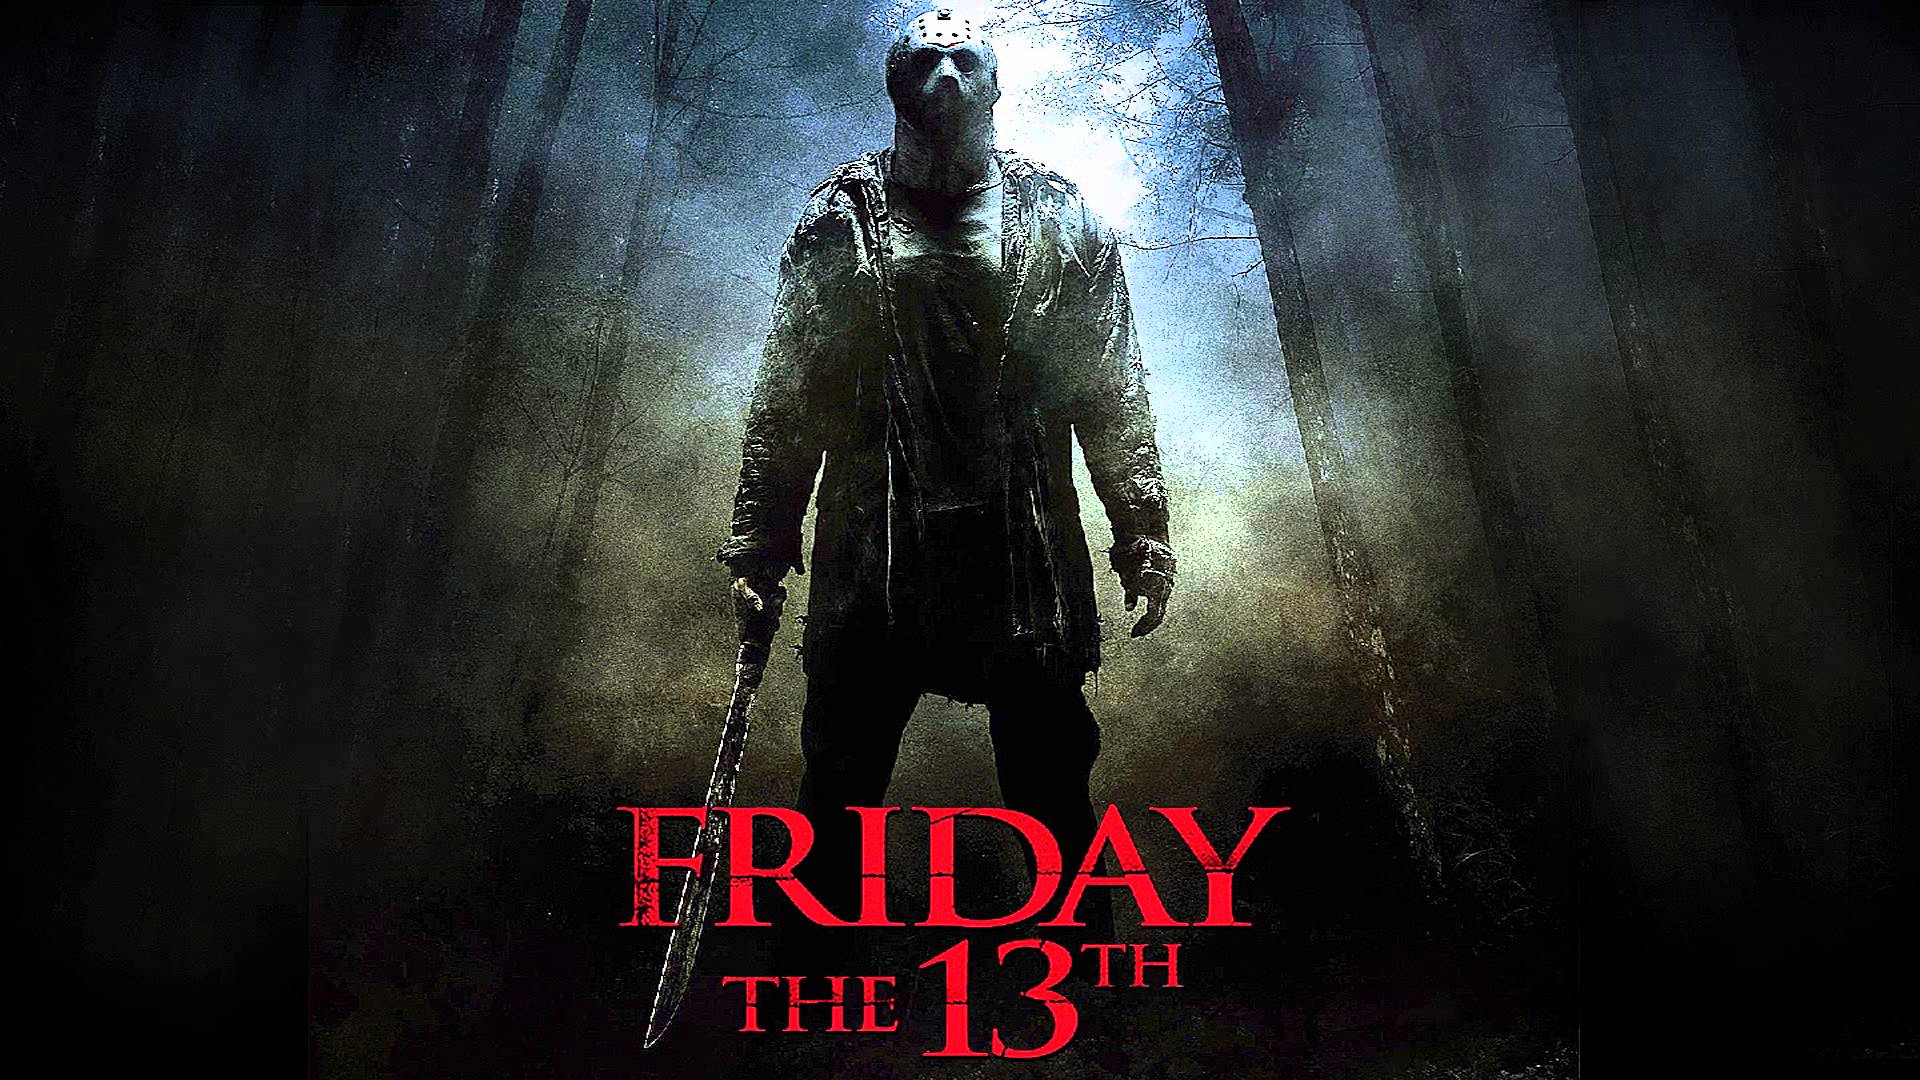 Friday The 13th #21